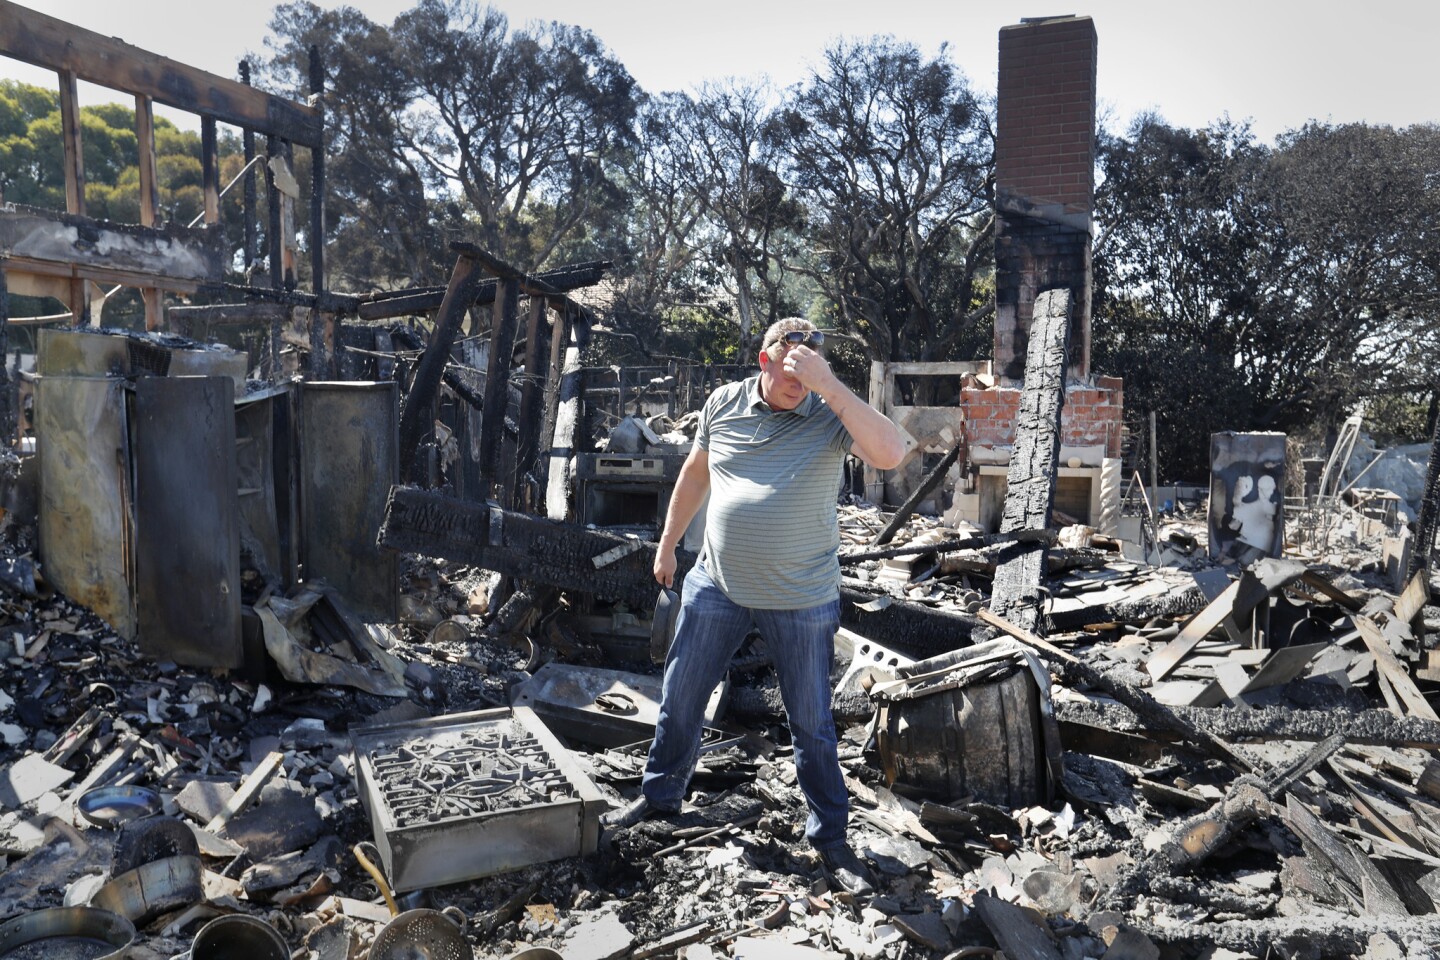 Holding a cast-iron skillet passed down to him from his grandmother, Danny Williamson looks through the remains of his home that was destroyed on Via El Estribo.